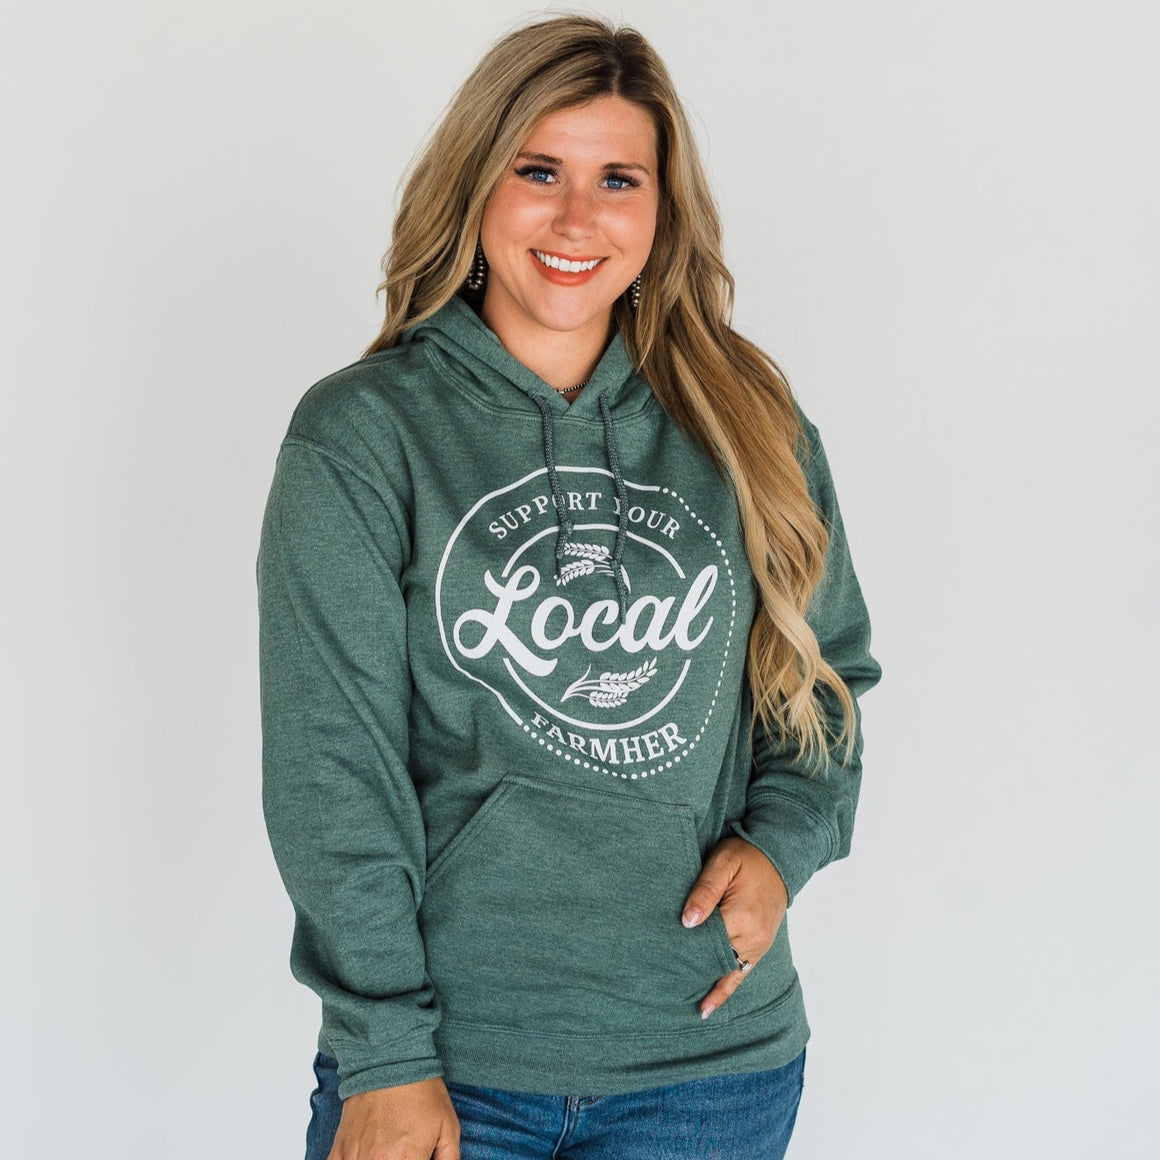 Sweatshirt "Support Your Local FarmHer" Forest Green